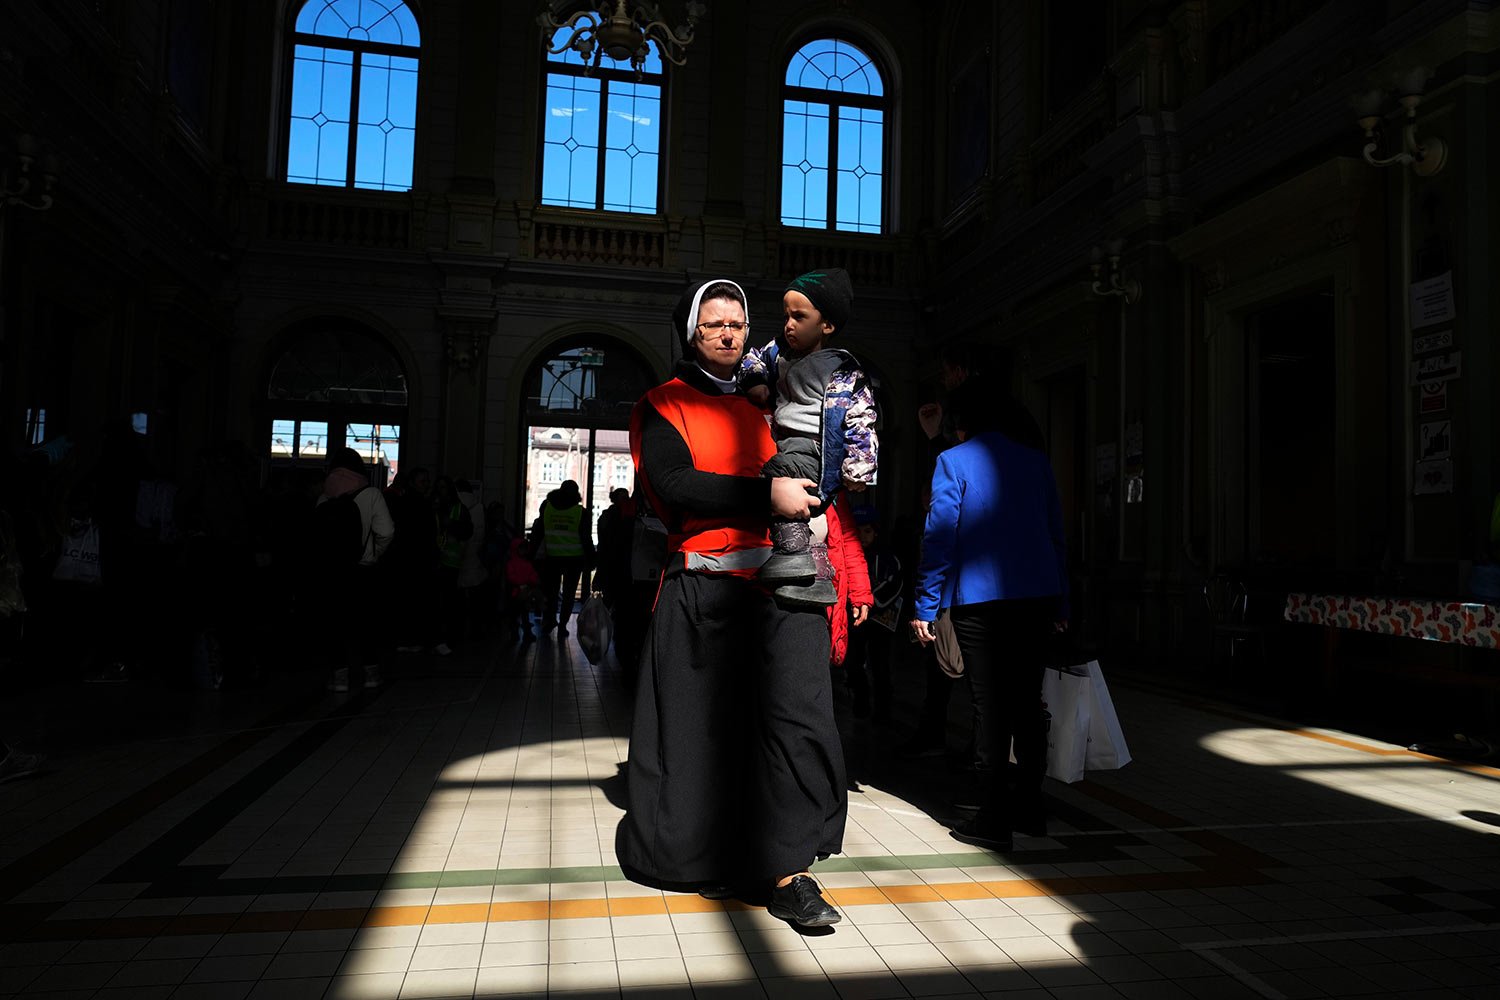  A Catholic nun helping as a volunteer, carries a boy from Ukraine at a railway station in Przemysl, southeastern Poland, on Wednesday, March 23, 2022. (AP Photo/Sergei Grits) 